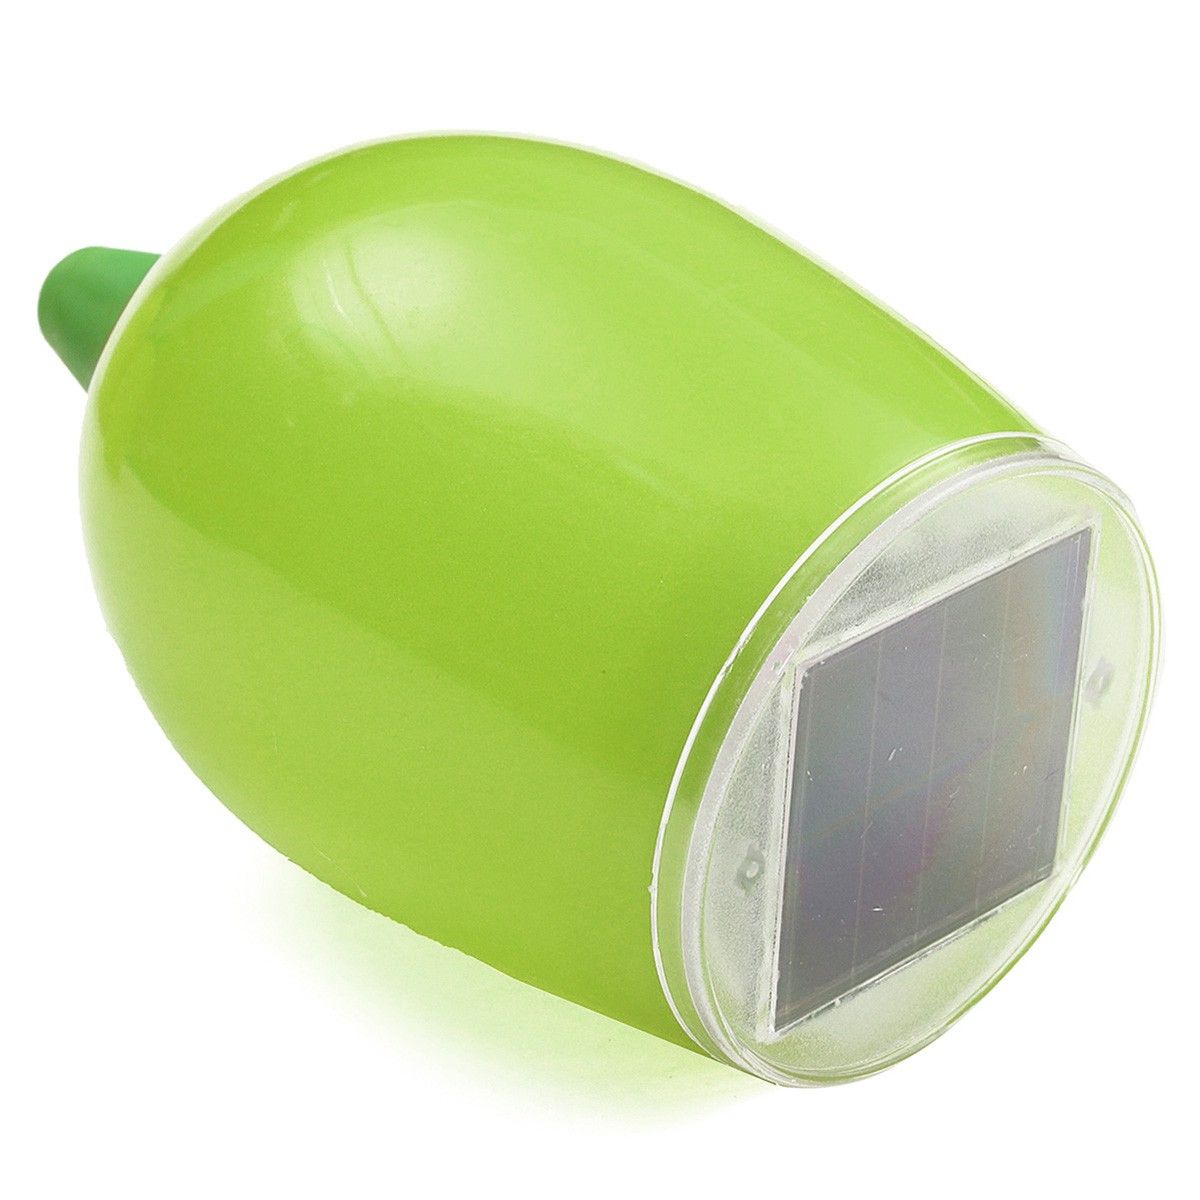 4PCS-Solar-Power-LED-Buried-In-Ground-Lights-Garden-Path-Lawn-Fence-Lighting-Lamp-1112597